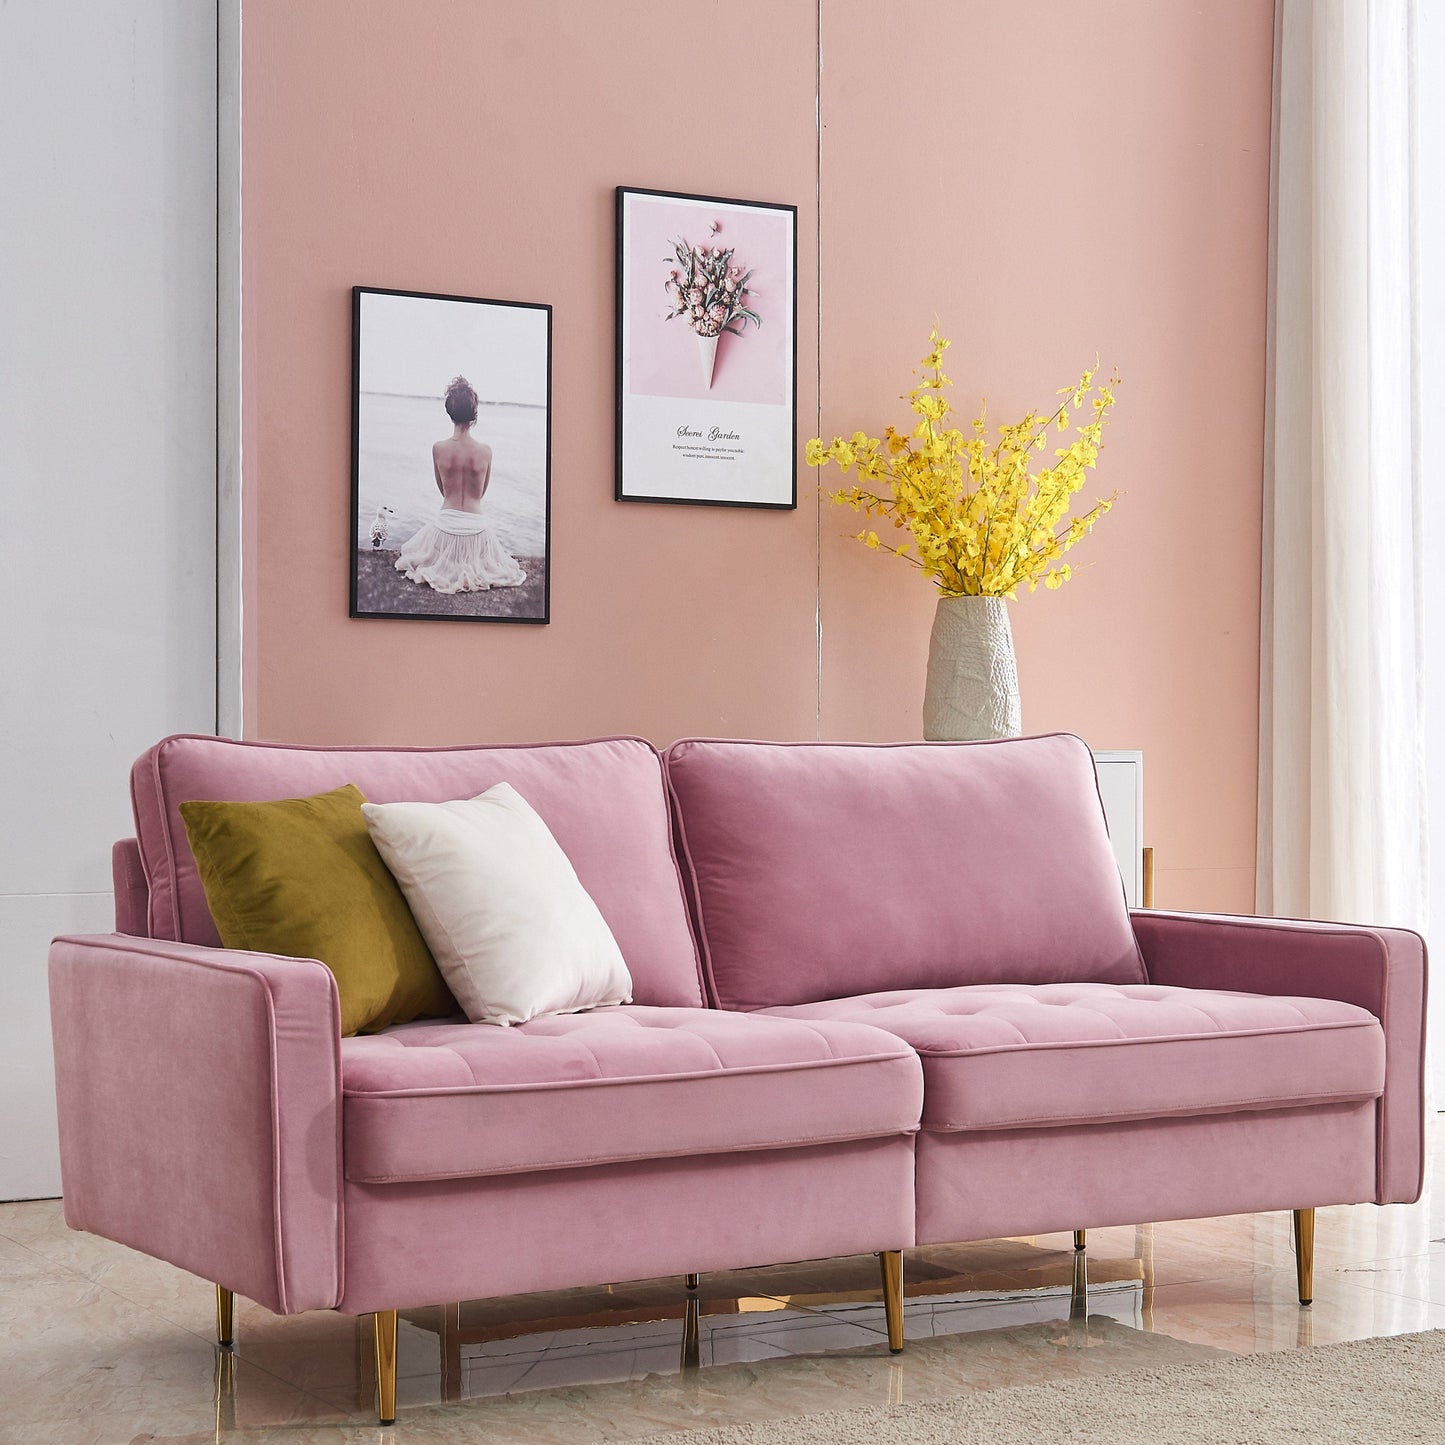 TFC&H Co. Modern Velvet Fabric Sofa 71" - Pink- Ships from The US - sofa at TFC&H Co.